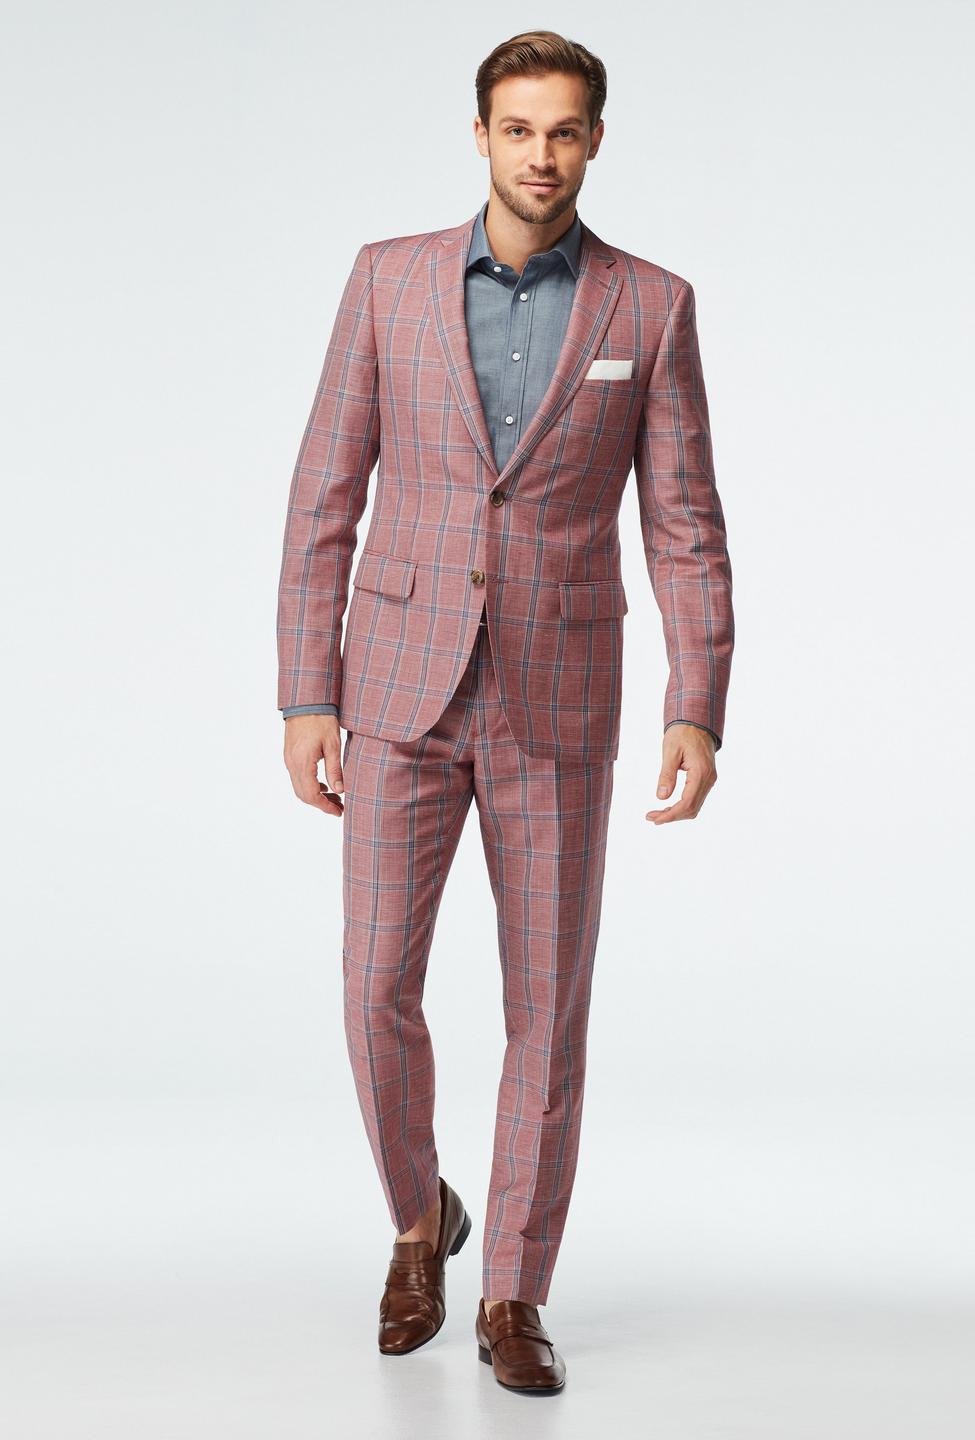 Red suit - Southwell Plaid Design from Seasonal Indochino Collection